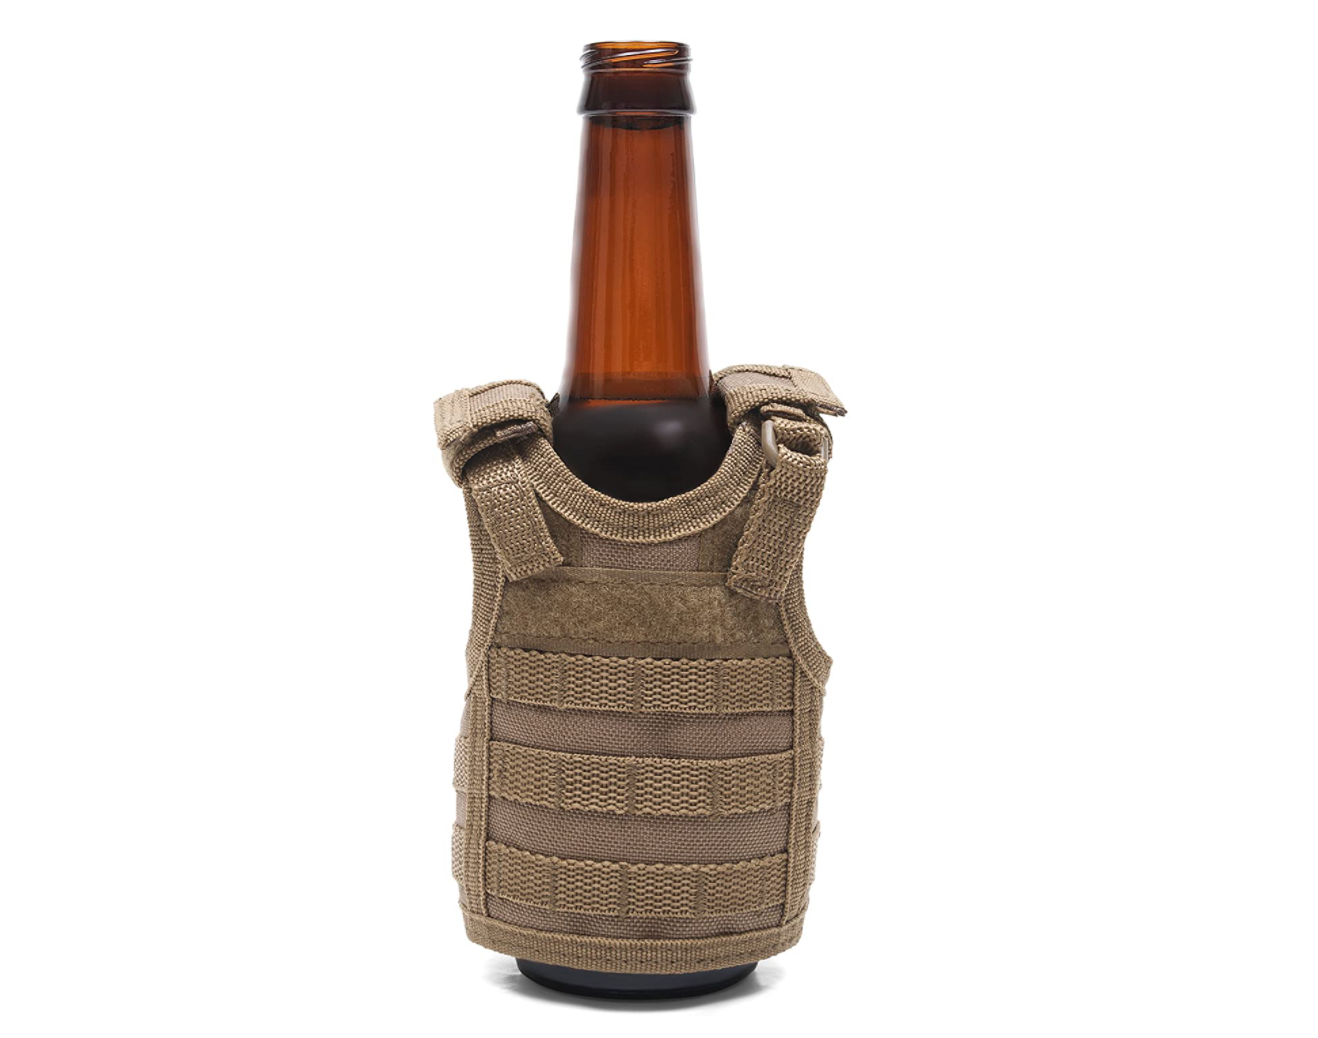 13 pieces of gear that will help you enjoy a cold beer in the great outdoors